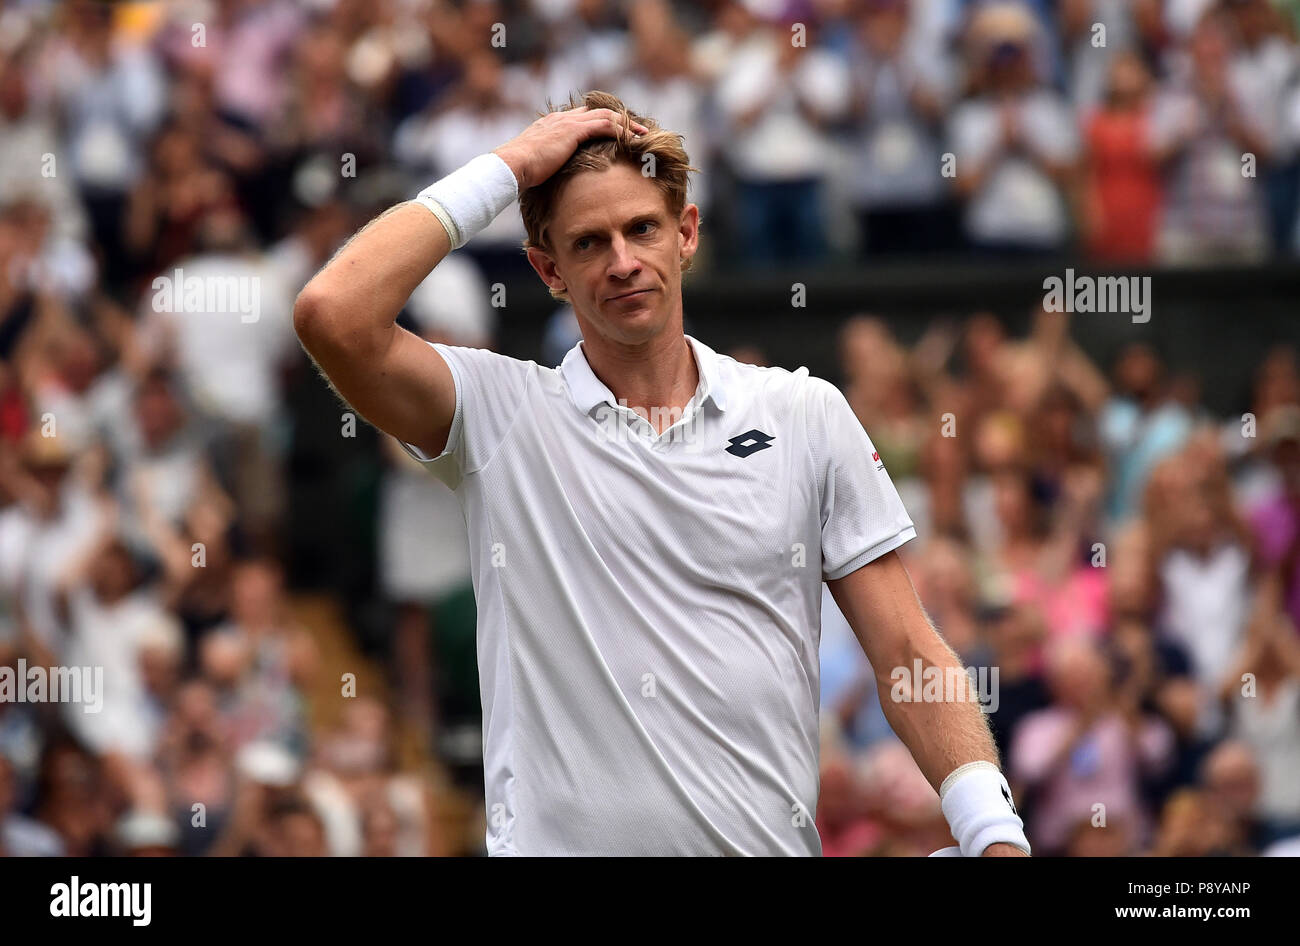 Kevin Anderson following his 7-6 (8/6) 6-7 (5/7) 6-7 (9/11) 6-4 26-24 victory in the longest semi-final in the tournament’s history on day eleven of the Wimbledon Championships at the All England Lawn Tennis and Croquet Club, Wimbledon. Stock Photo